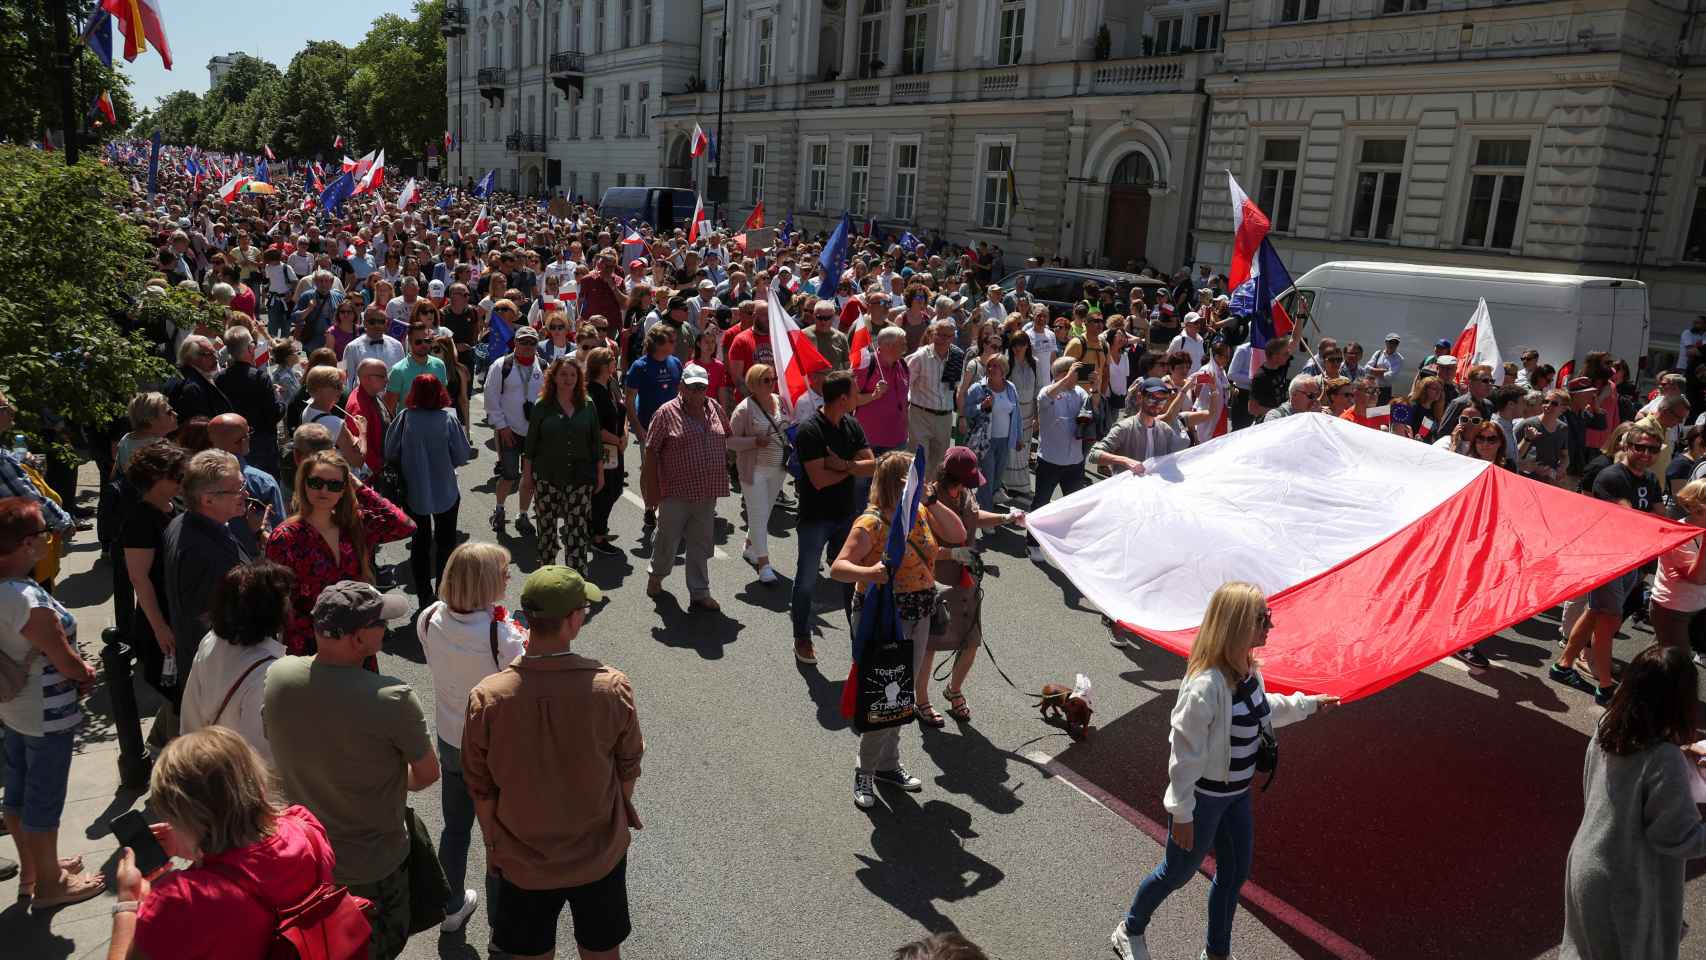 The Polish opposition organizes a protest march against the new government law.